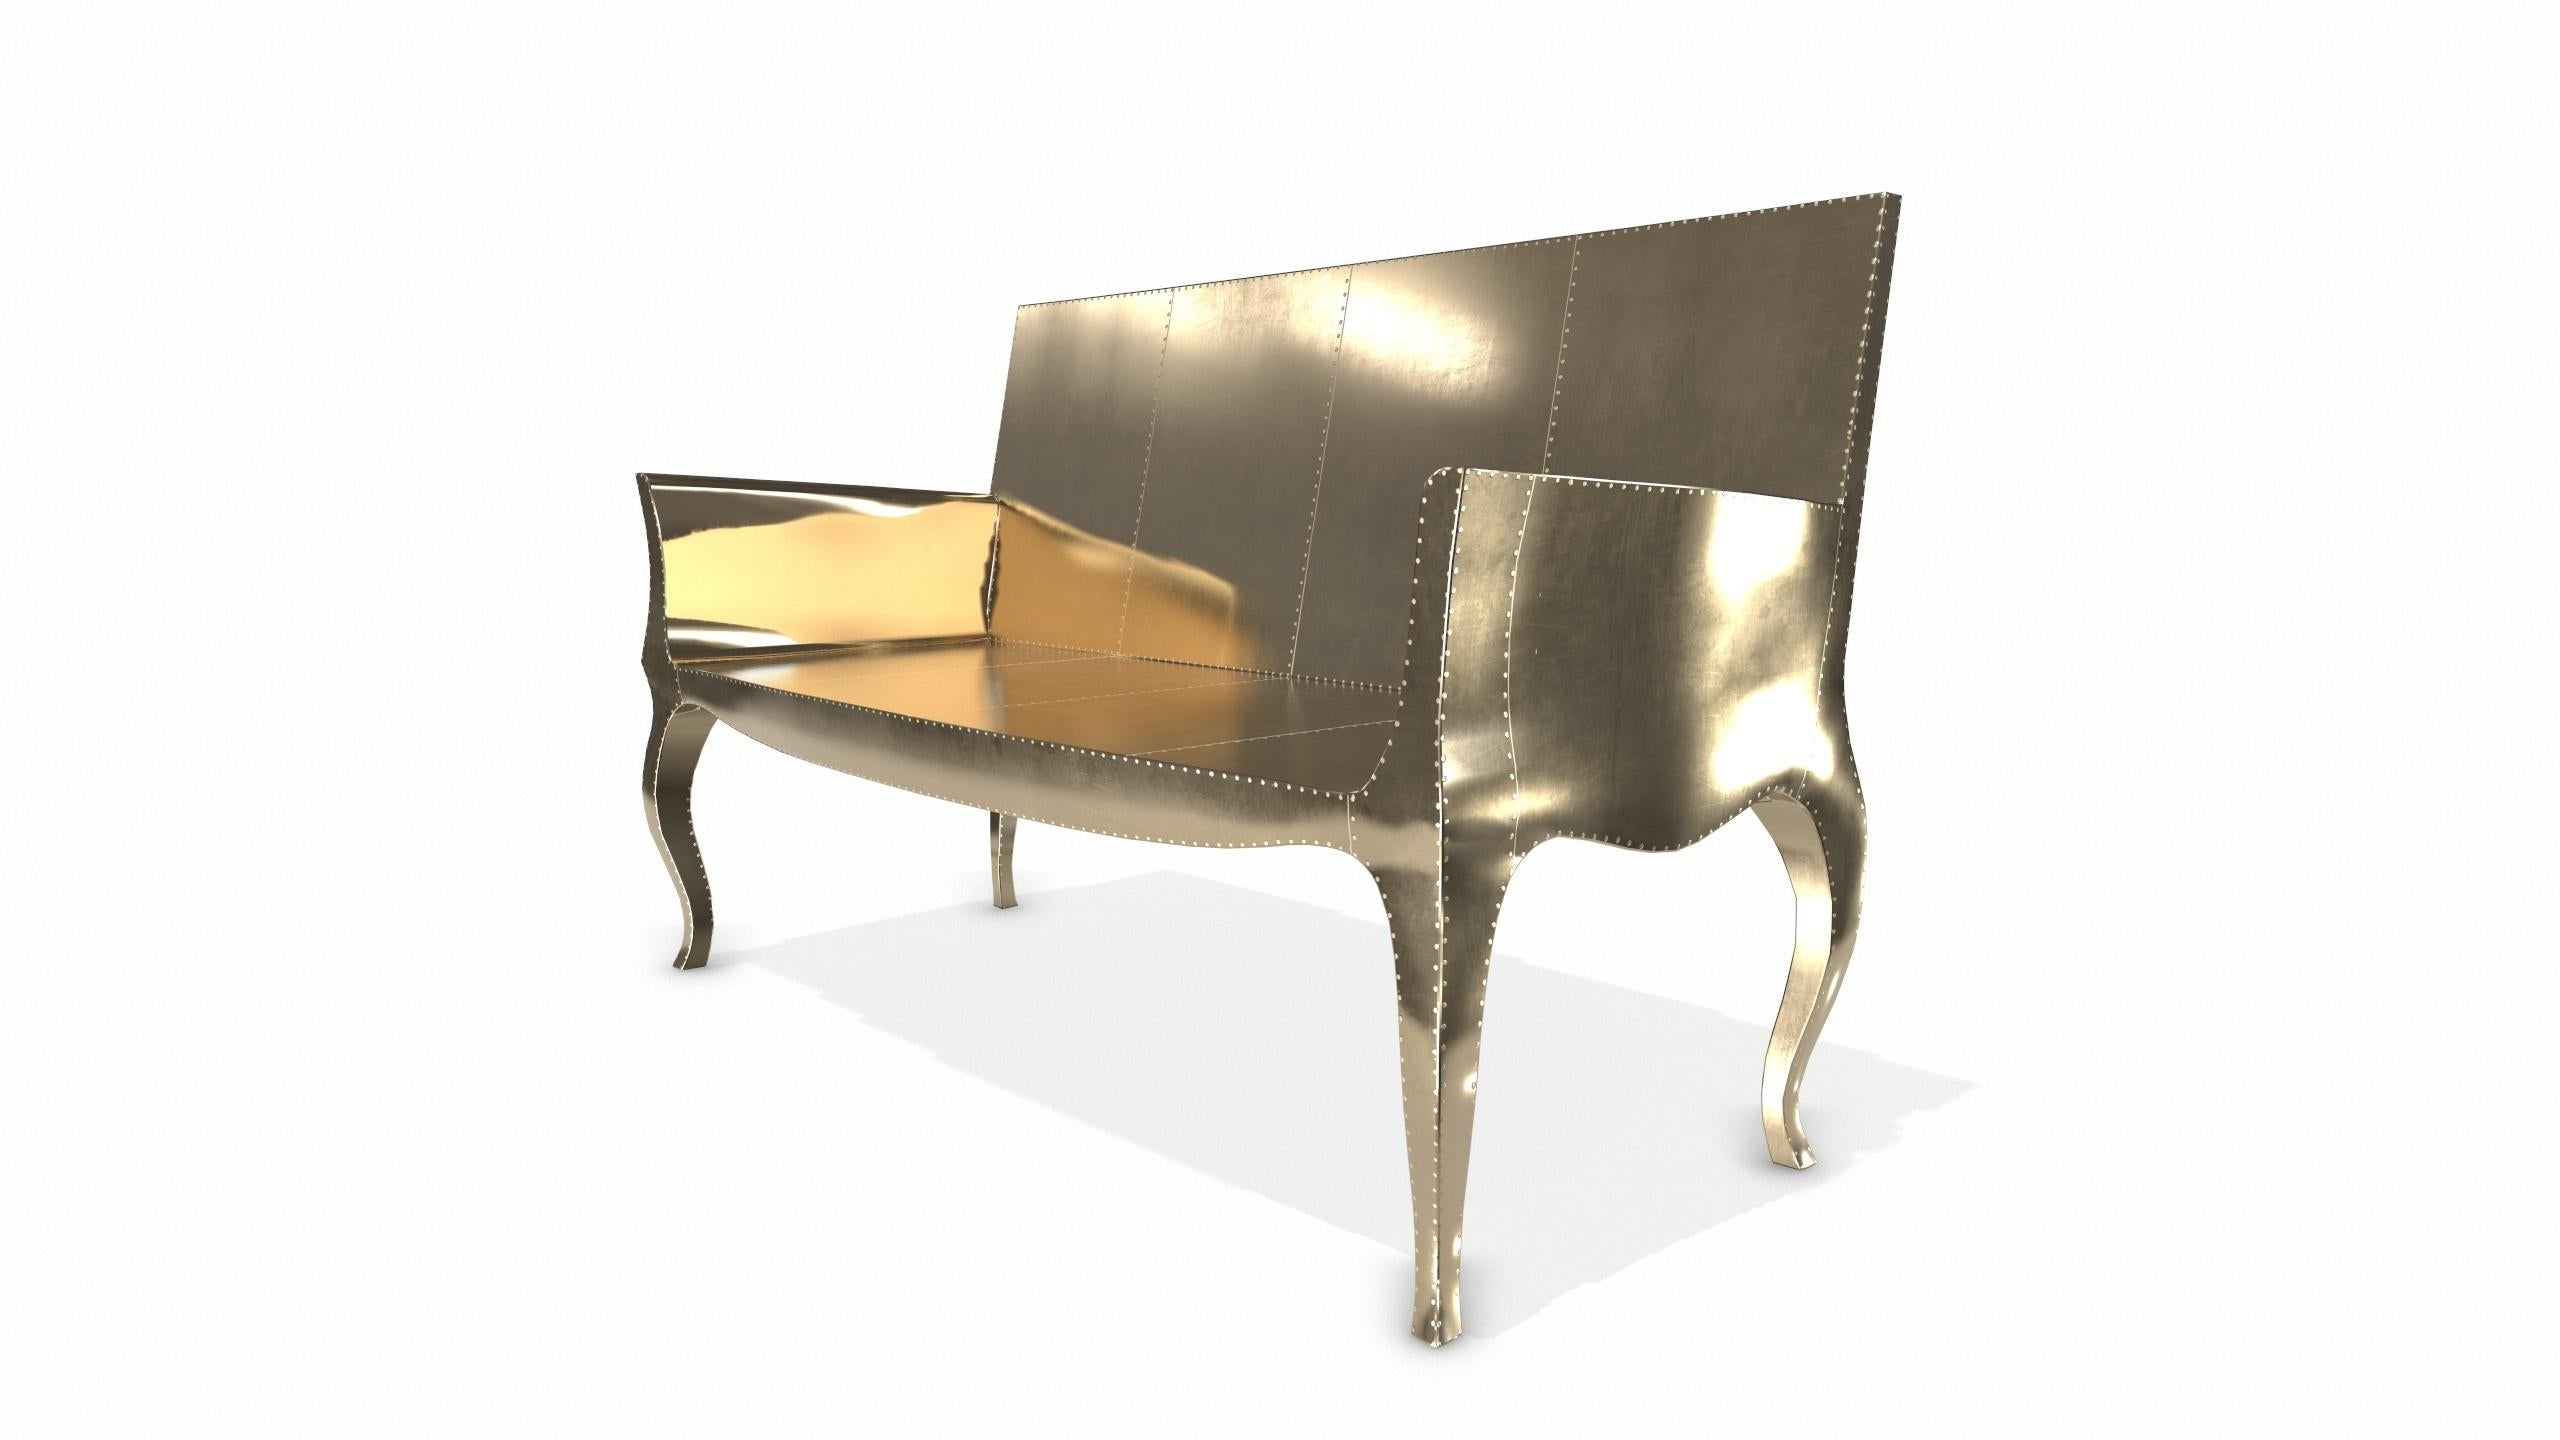 Hand-Crafted Louise Settee Art Deco Daybeds in Smooth Brass by Paul Mathieu for S Odegard For Sale